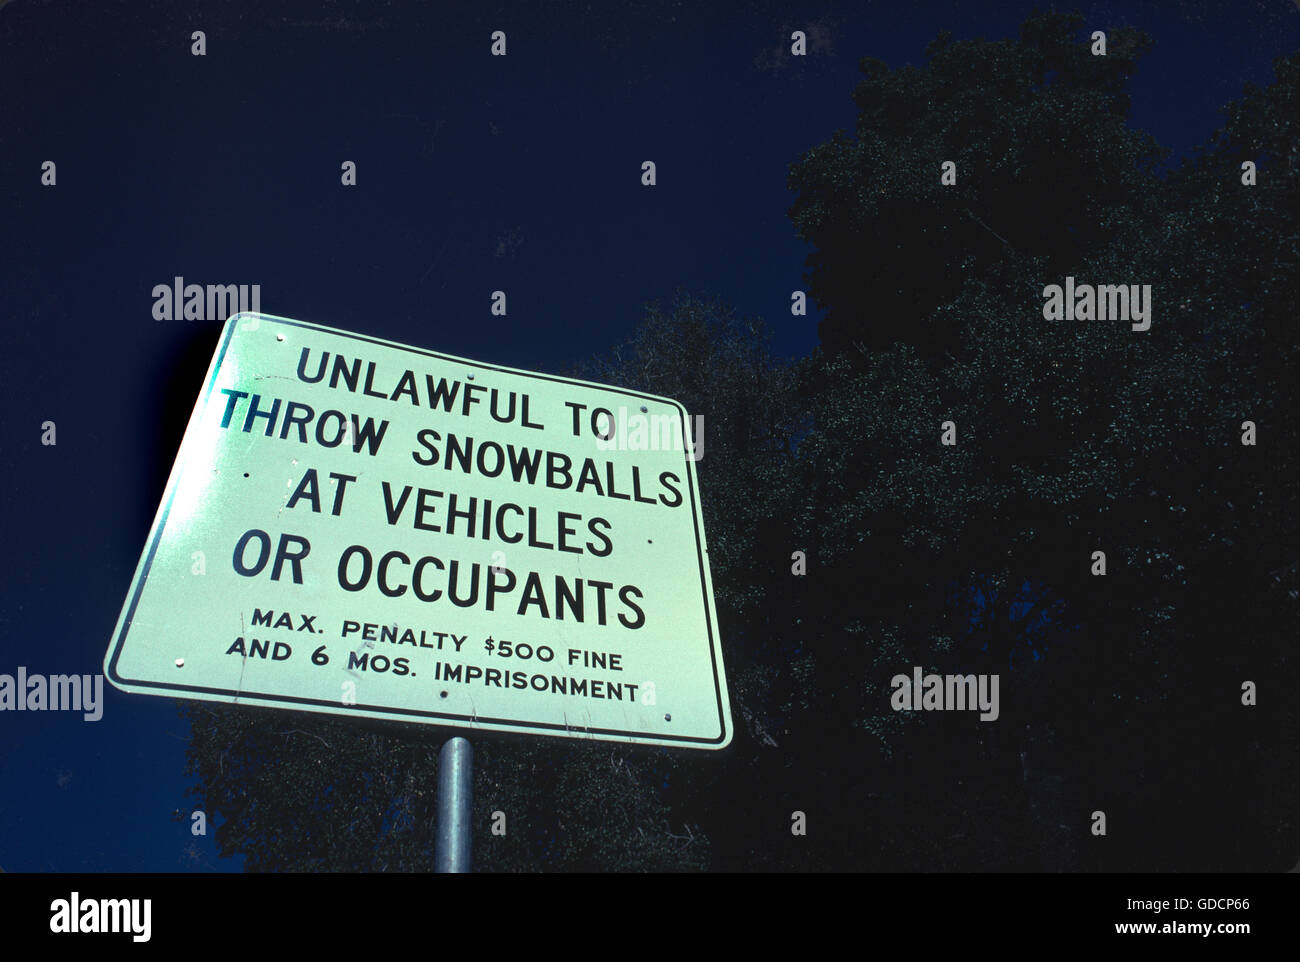 Serious, but humorous too, sign near the Palomar Mountain in San Diego County, California USA - Unlawful to Throw Snowballs at Vehicles or Occupants Stock Photo